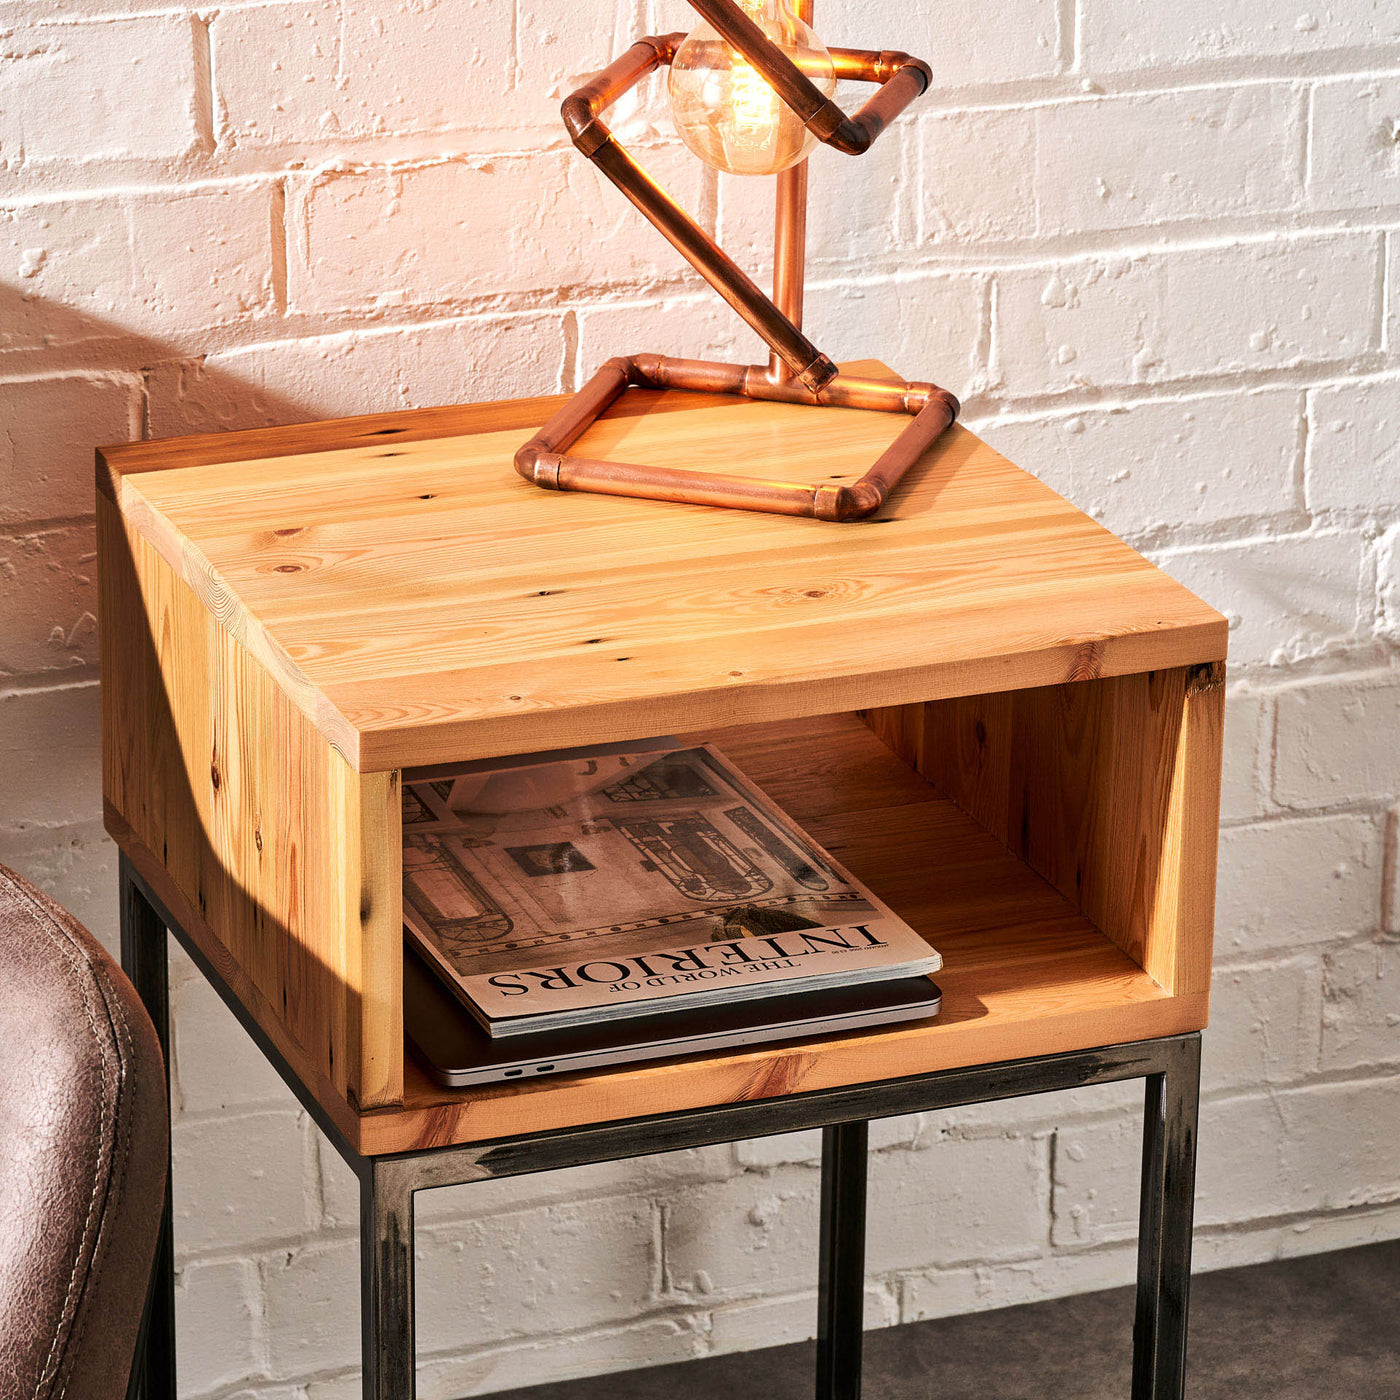 Handcrafted Cube Side Table Made from Reclaimed Timber